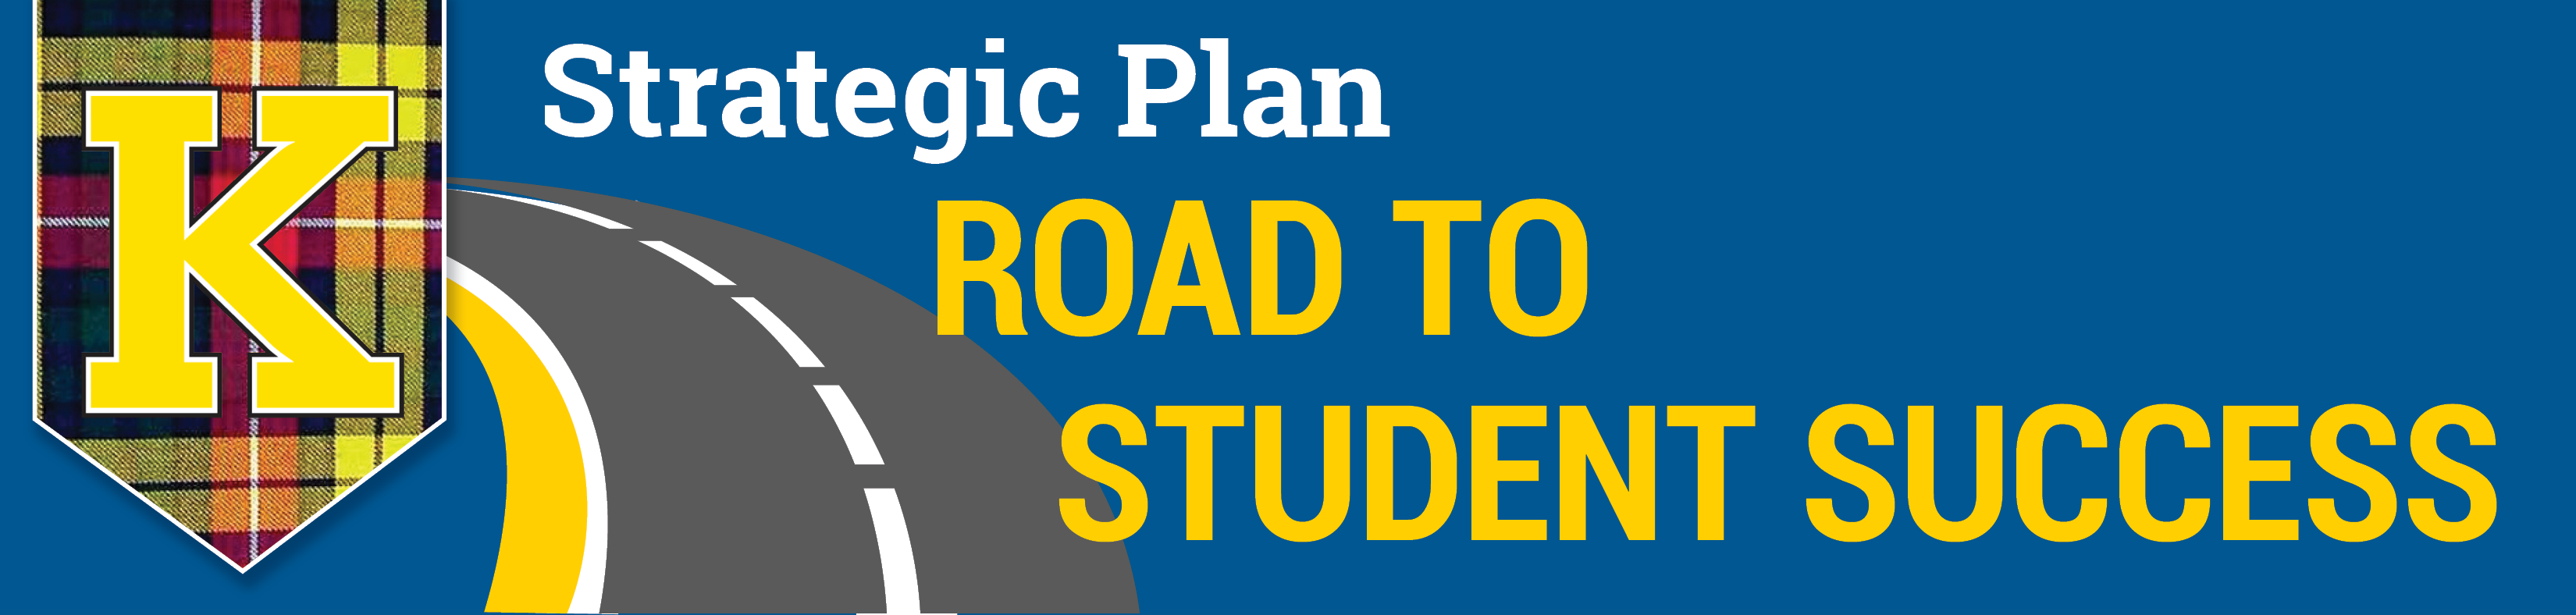 road to student success